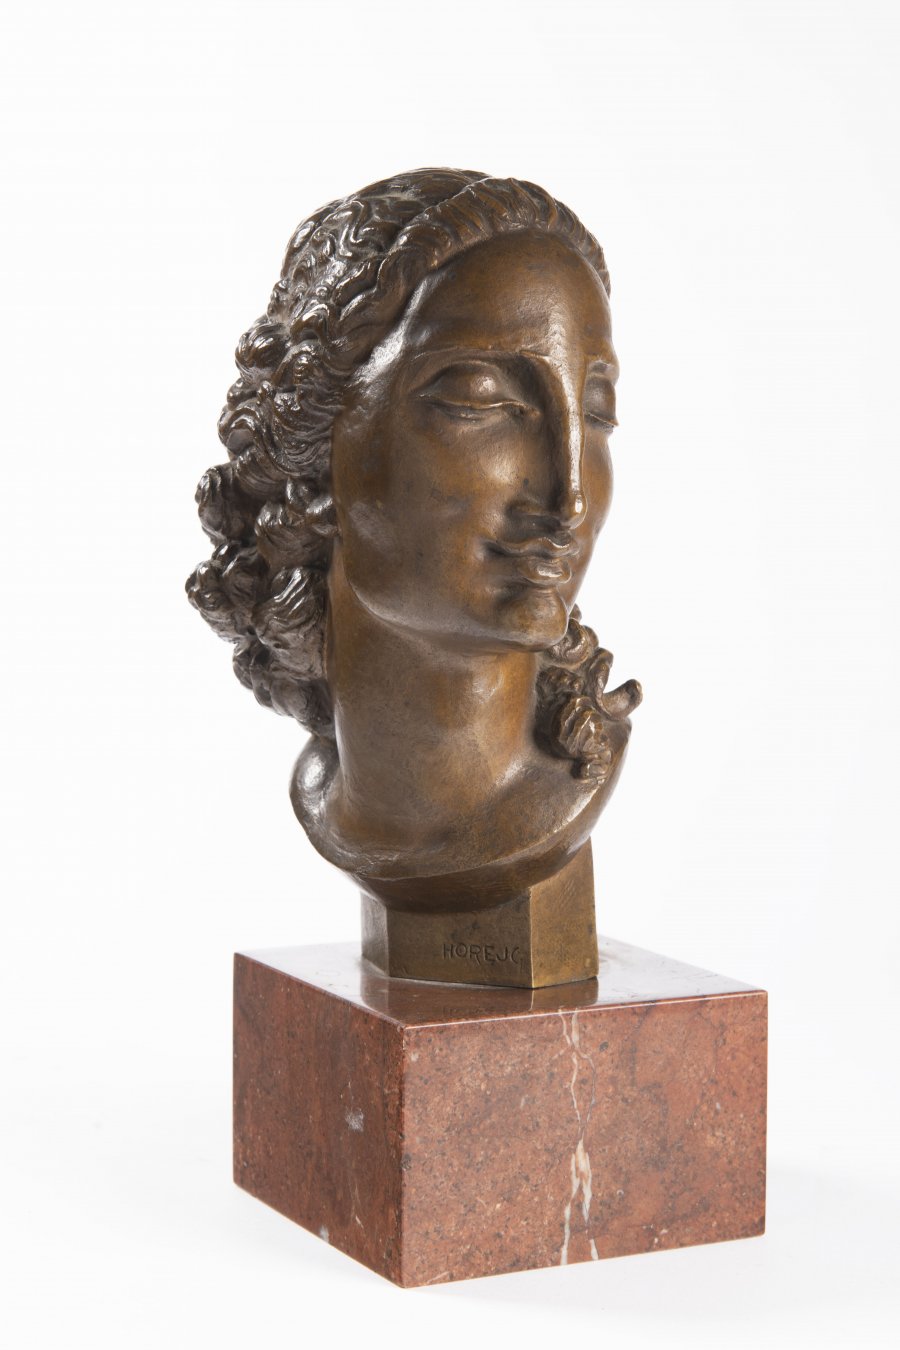 A HEAD OF A WOMAN WITH A RIBBON IN HER HAIR